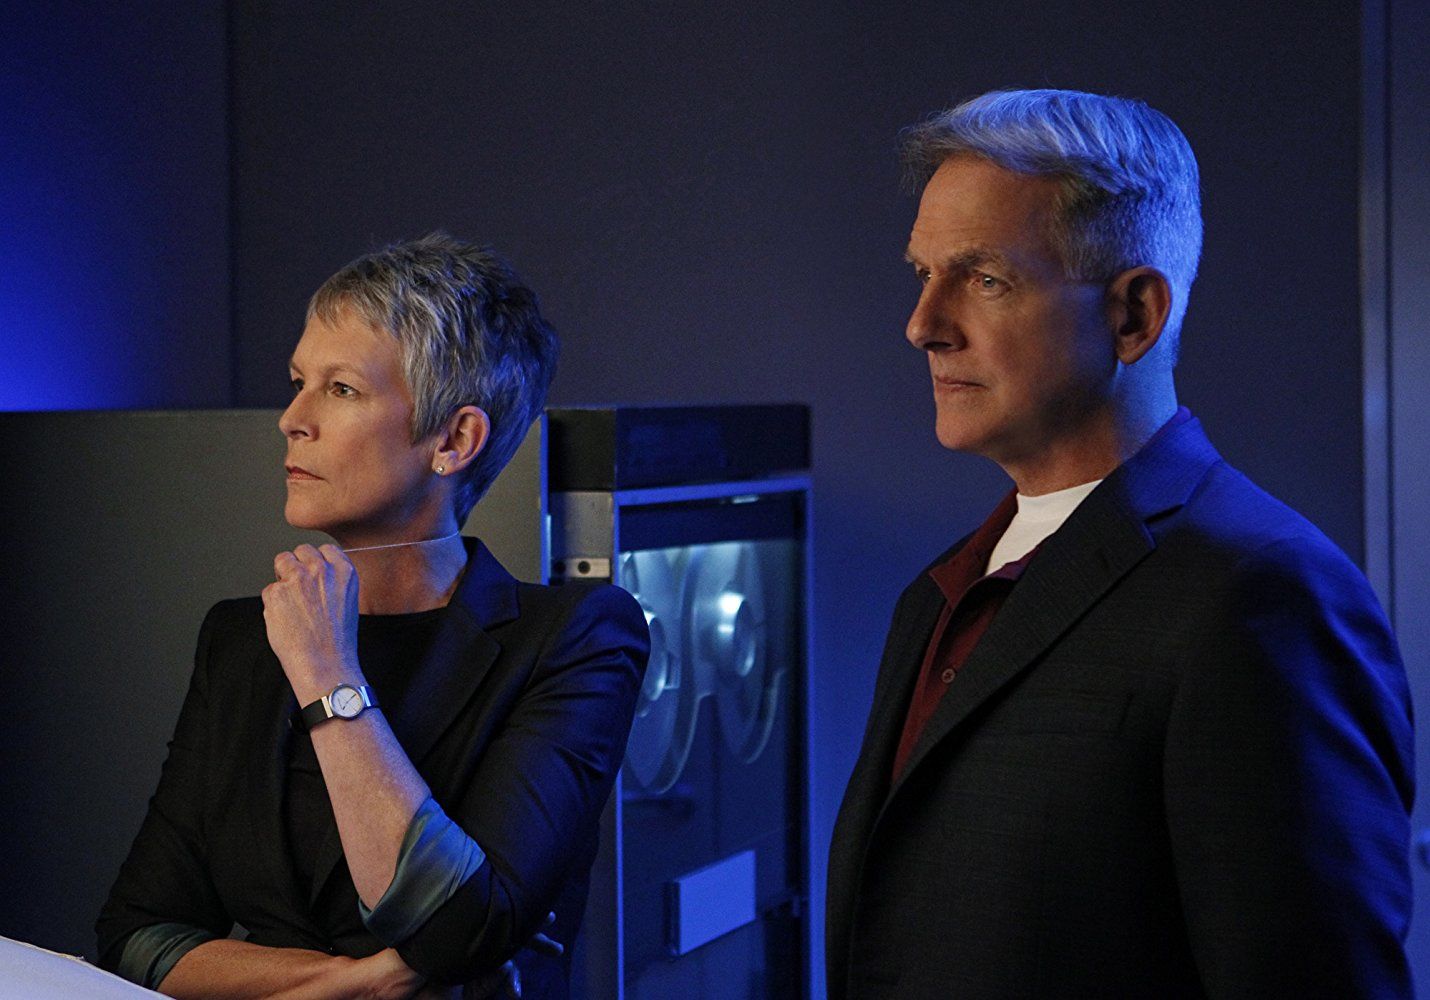 NCIS': 10 Huge Celebrities You Probably Forgot Appeared on the Show